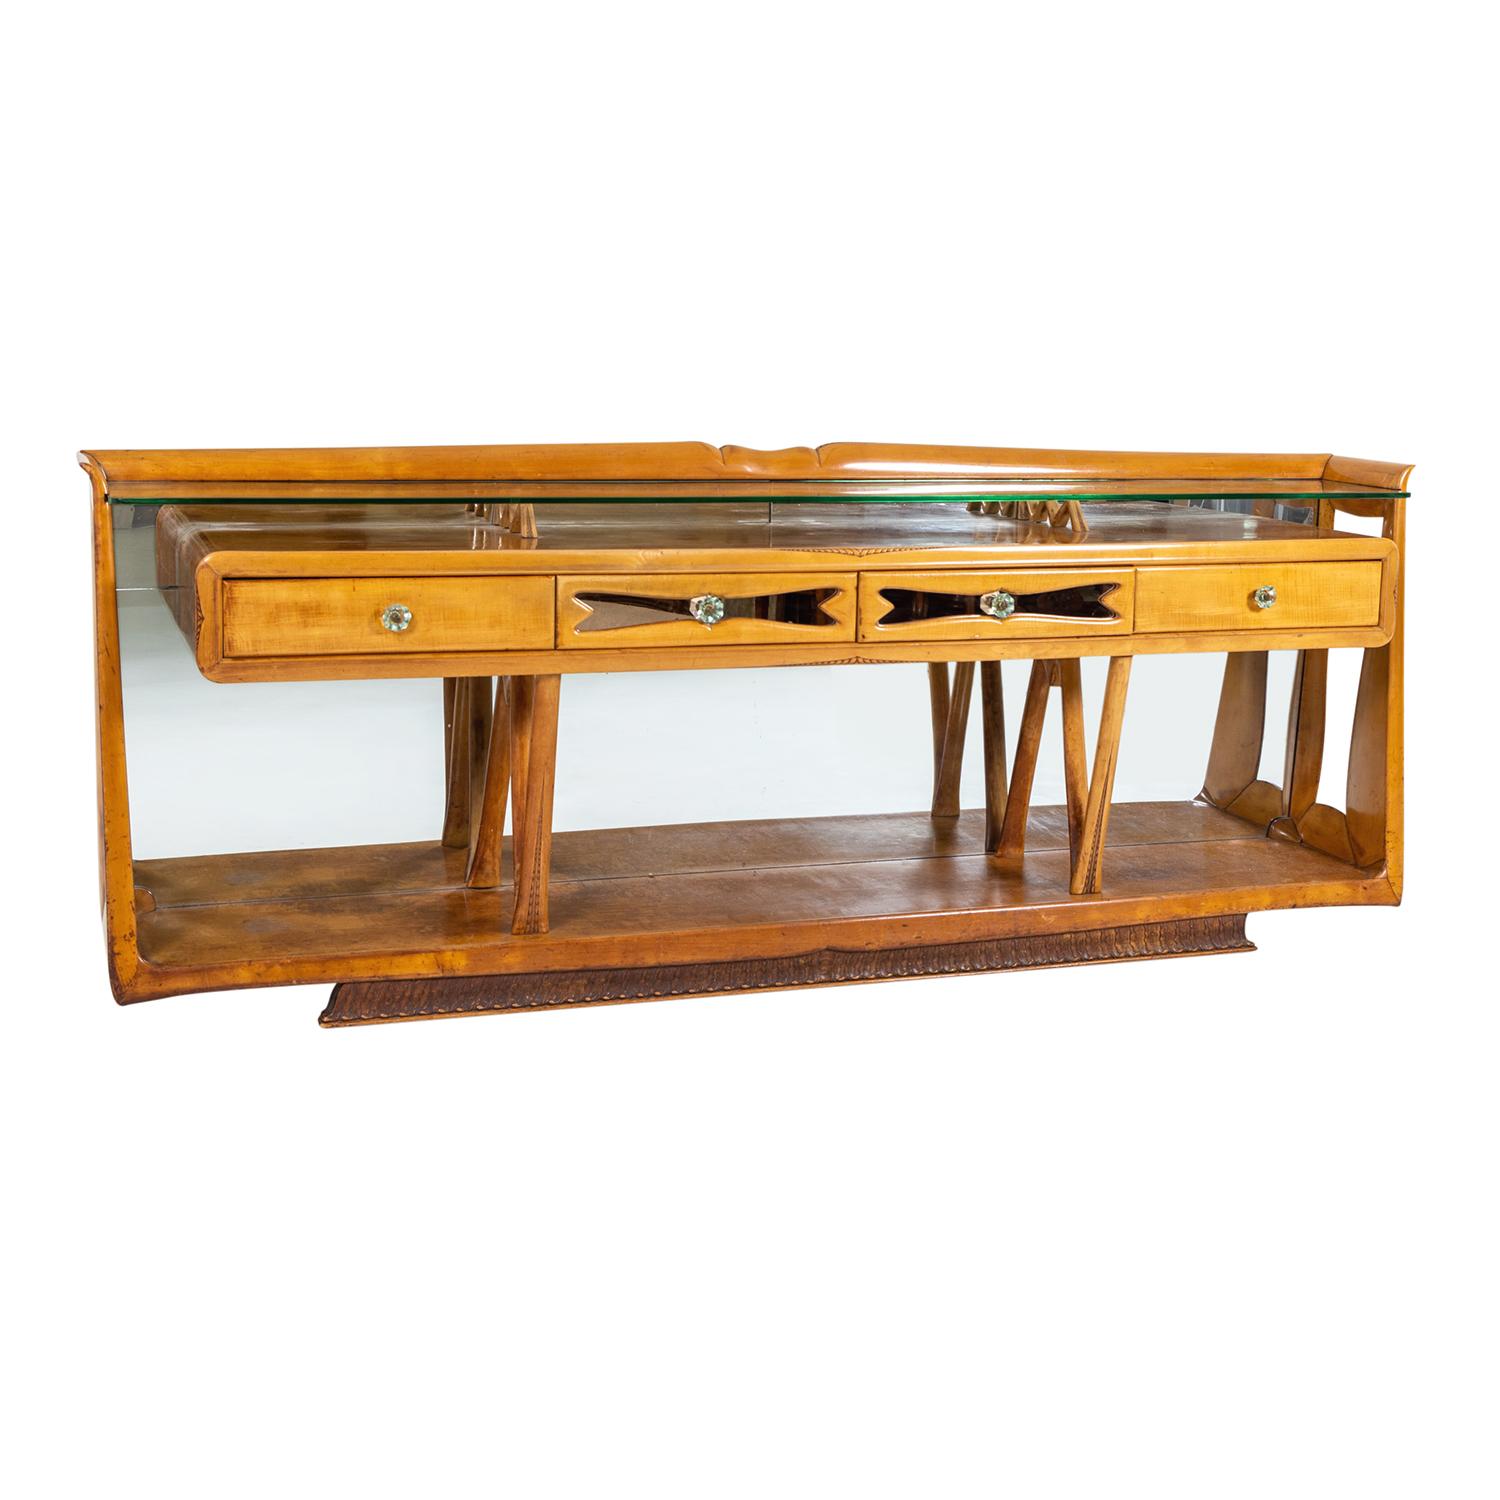 A light-brown, vintage Mid-Cenutry Modern Italian sideboard with a clear glass top made of hand crafted polished maplewood and walnut, in good condition. The large credenza is composed with four drawers which are supported by four arched legs, the